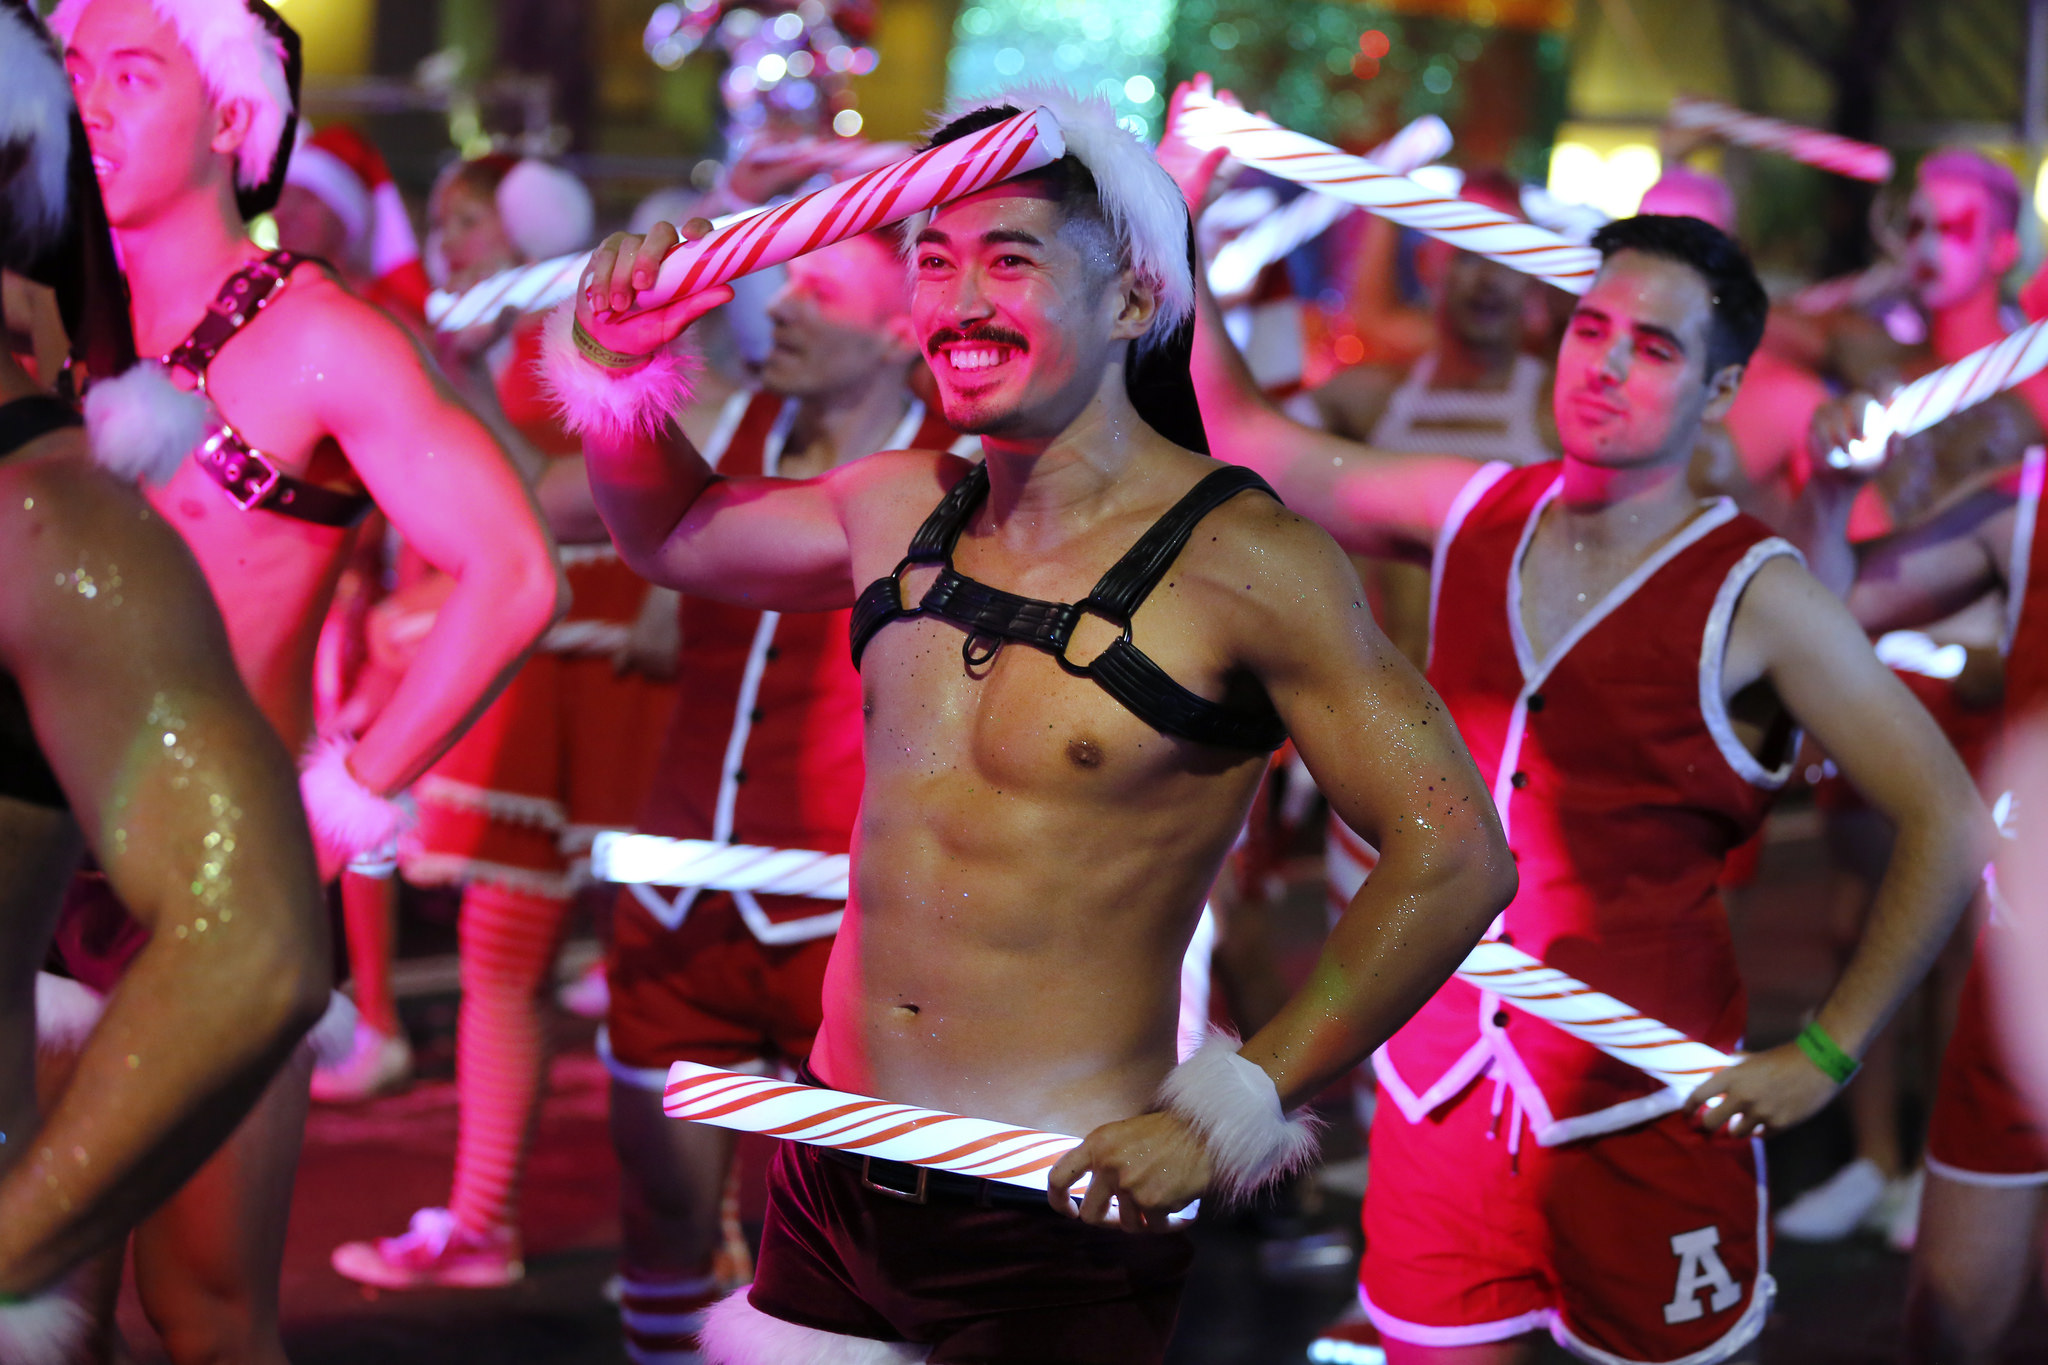 NSW government likely to reject extended Mardi Gras lockout law relaxation